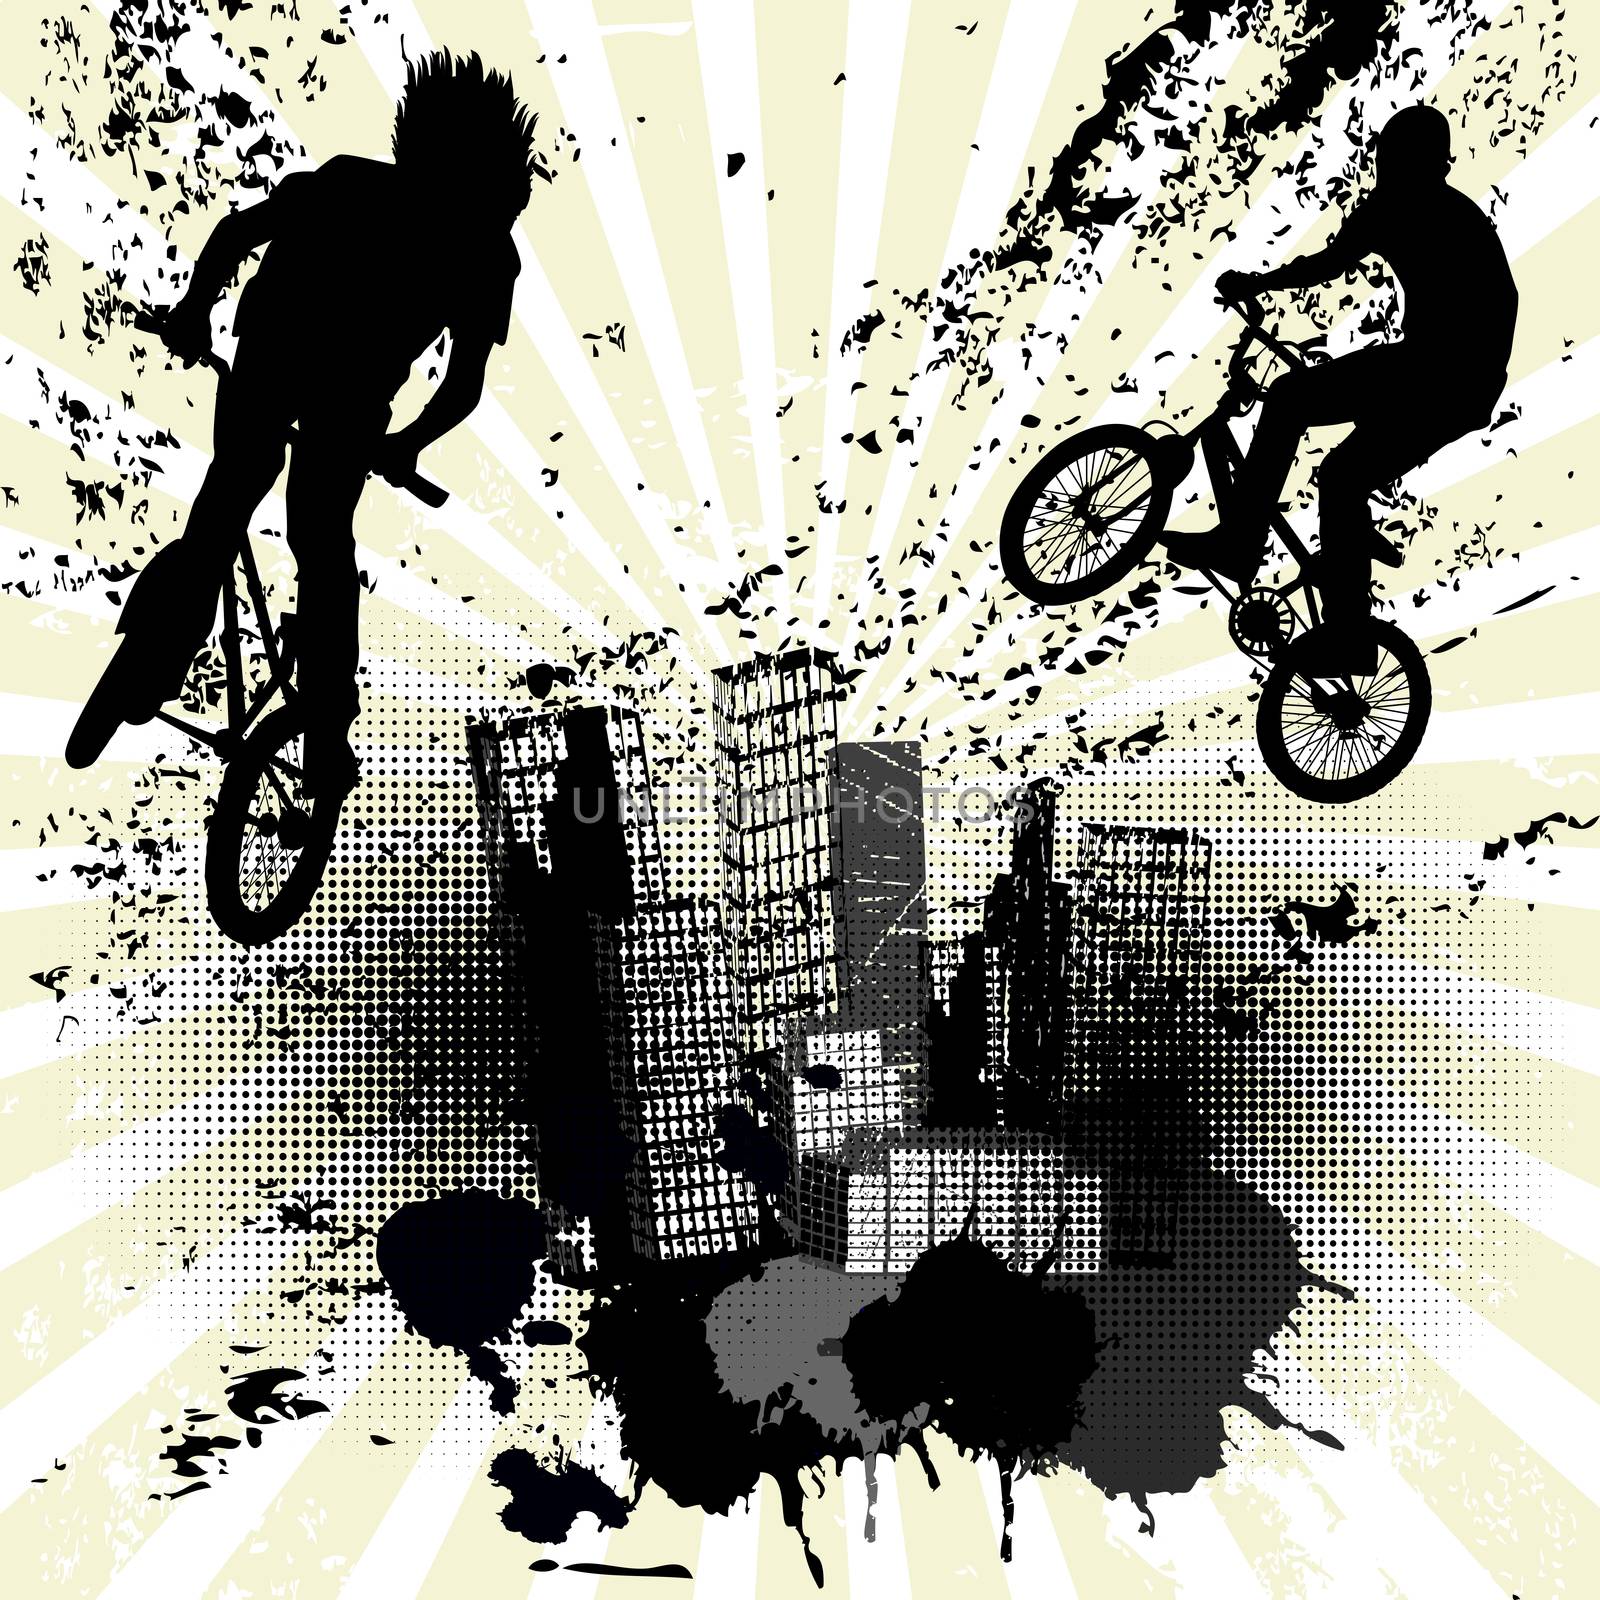 Grunge background with two bikers and city skyline over sunburst by hibrida13